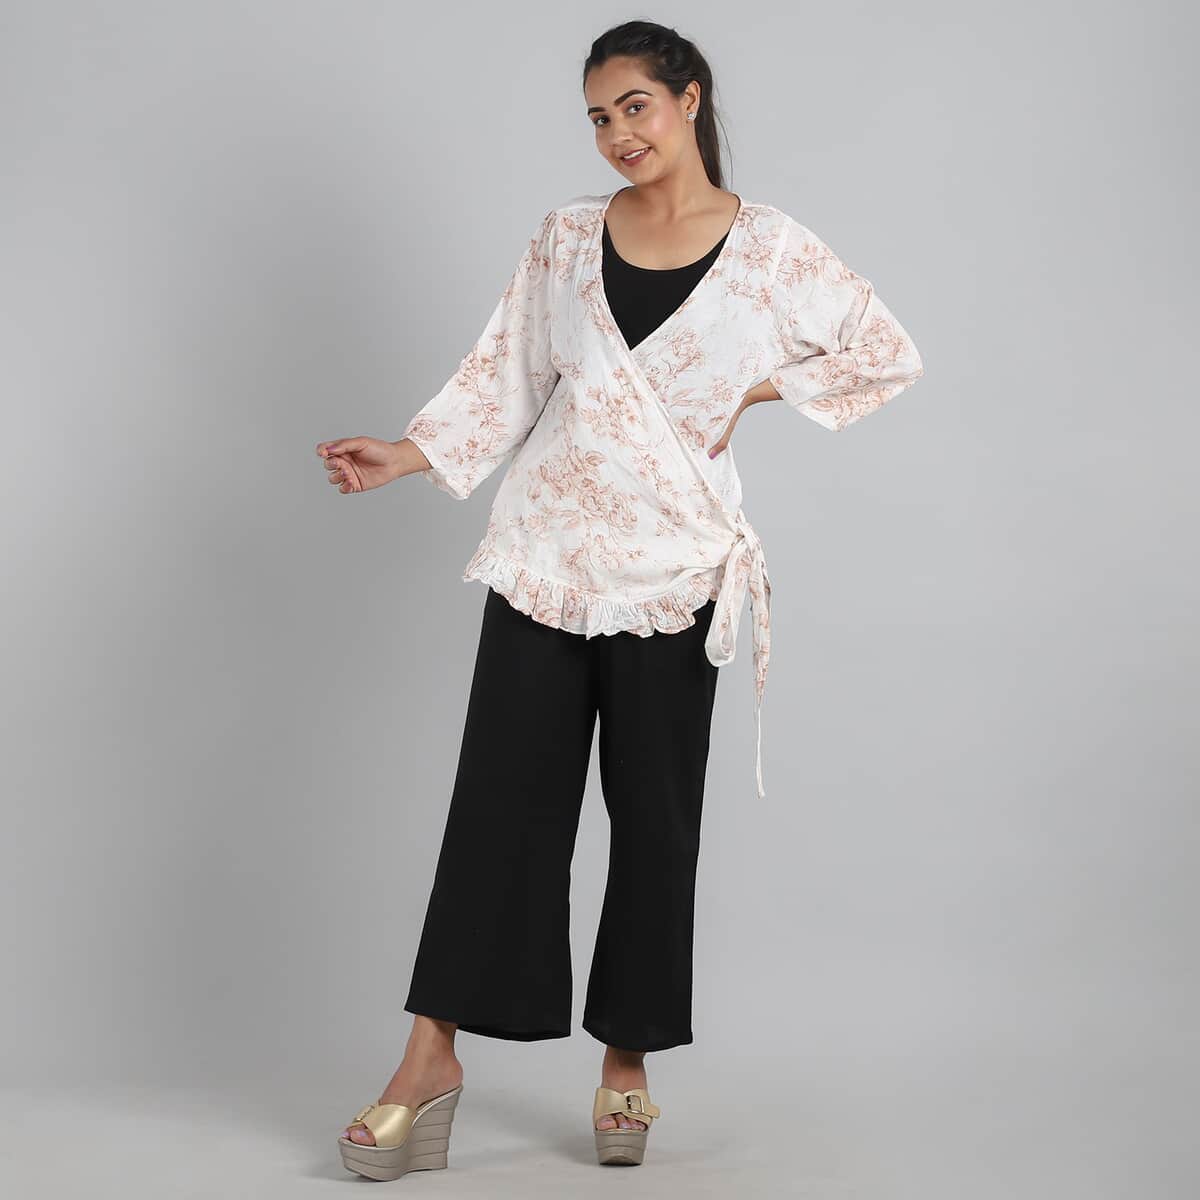 JOVIE Pink with Floral pattern Cotton Gauze Wrap Blouse with Frill Trim - One Size Missy image number 1